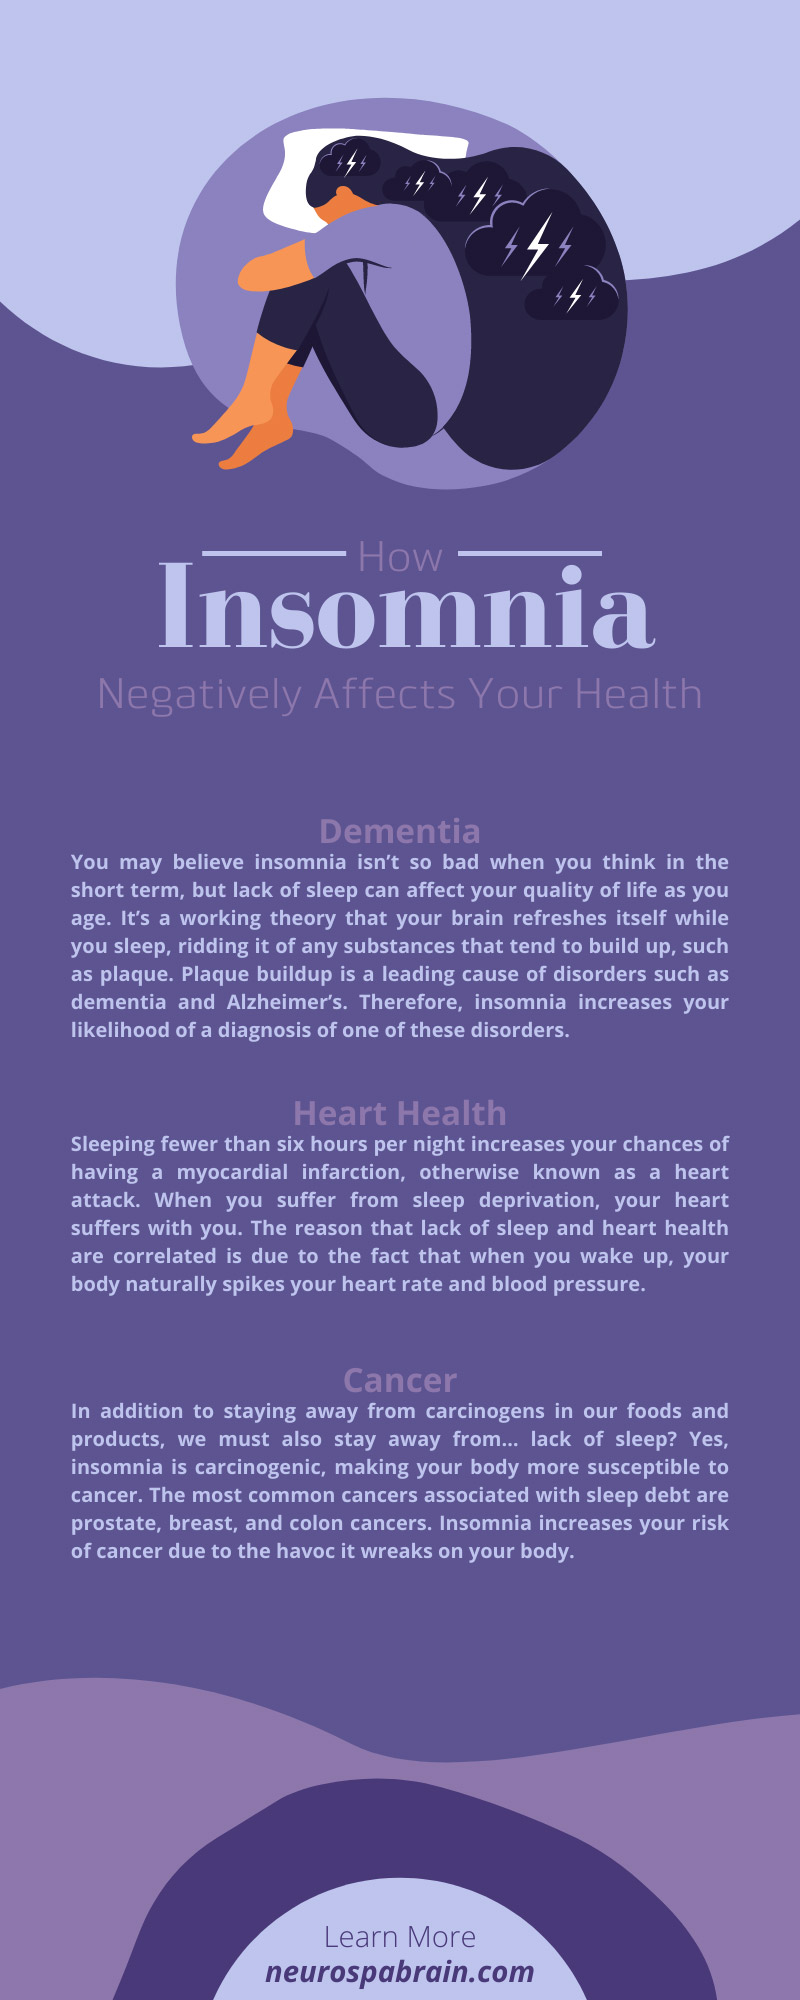 How Insomnia Negatively Affects Your Health